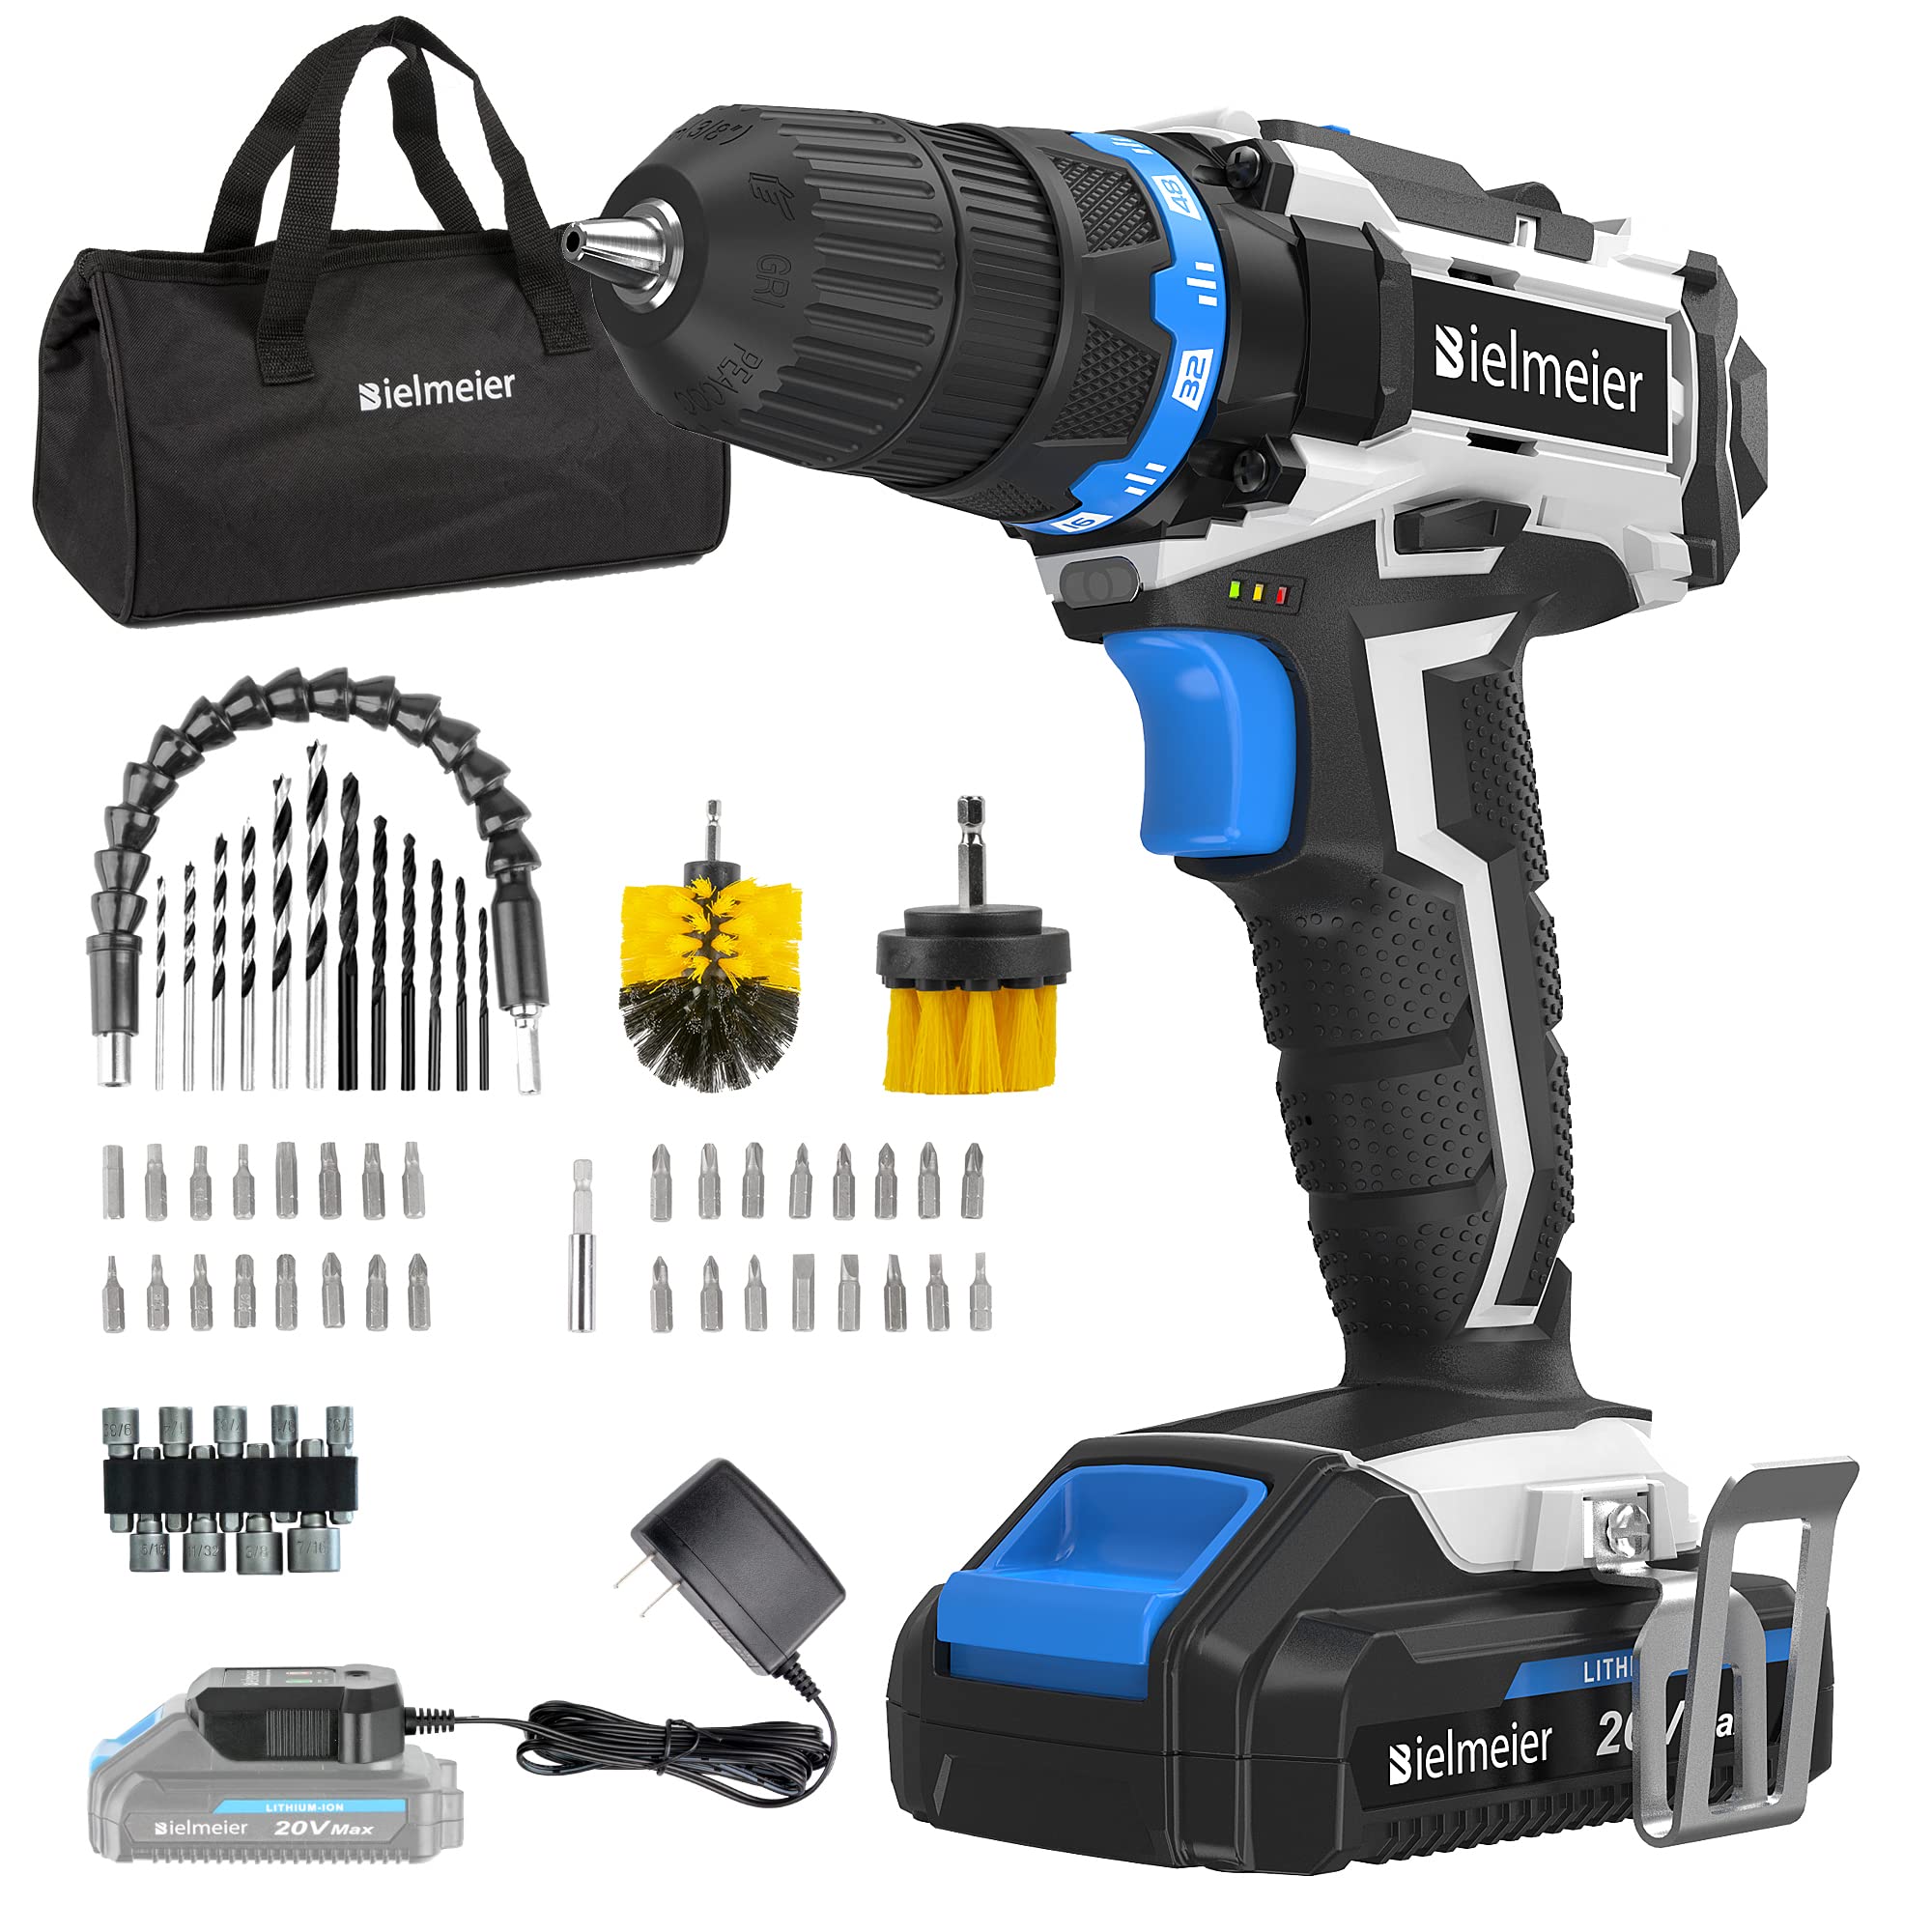 Bielmeier 20V MAX Cordless Drill Set, Drill kit with Lithium-Ion and charger,3/8 inches Keyless Chuck, Electric Drill with 2-variable speed switch LED Drill 2 pcs Brush and 58pcs Drill Bits…